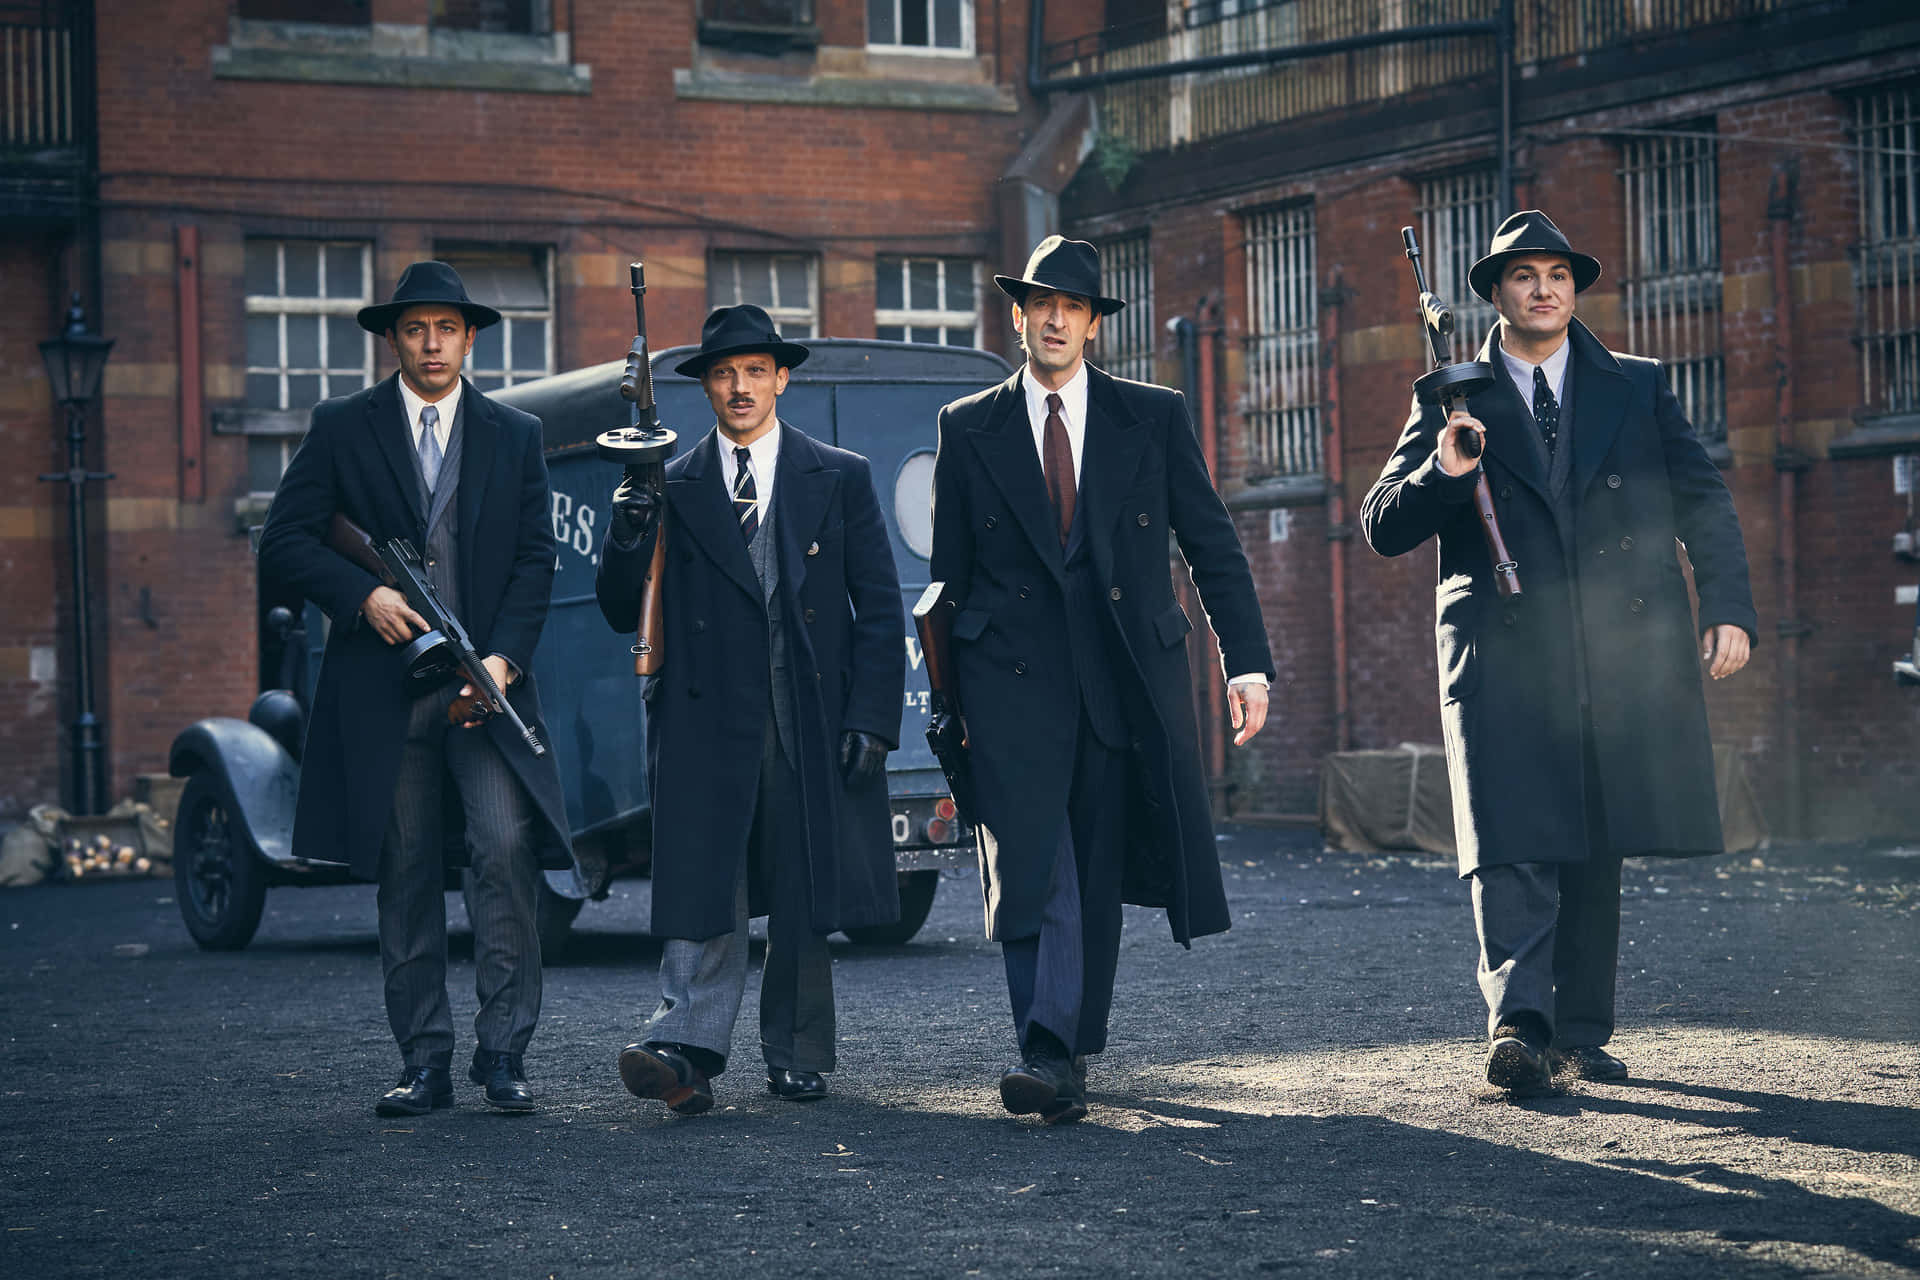 Sophisticated Gangster - Thomas Shelby In Peaky Blinders